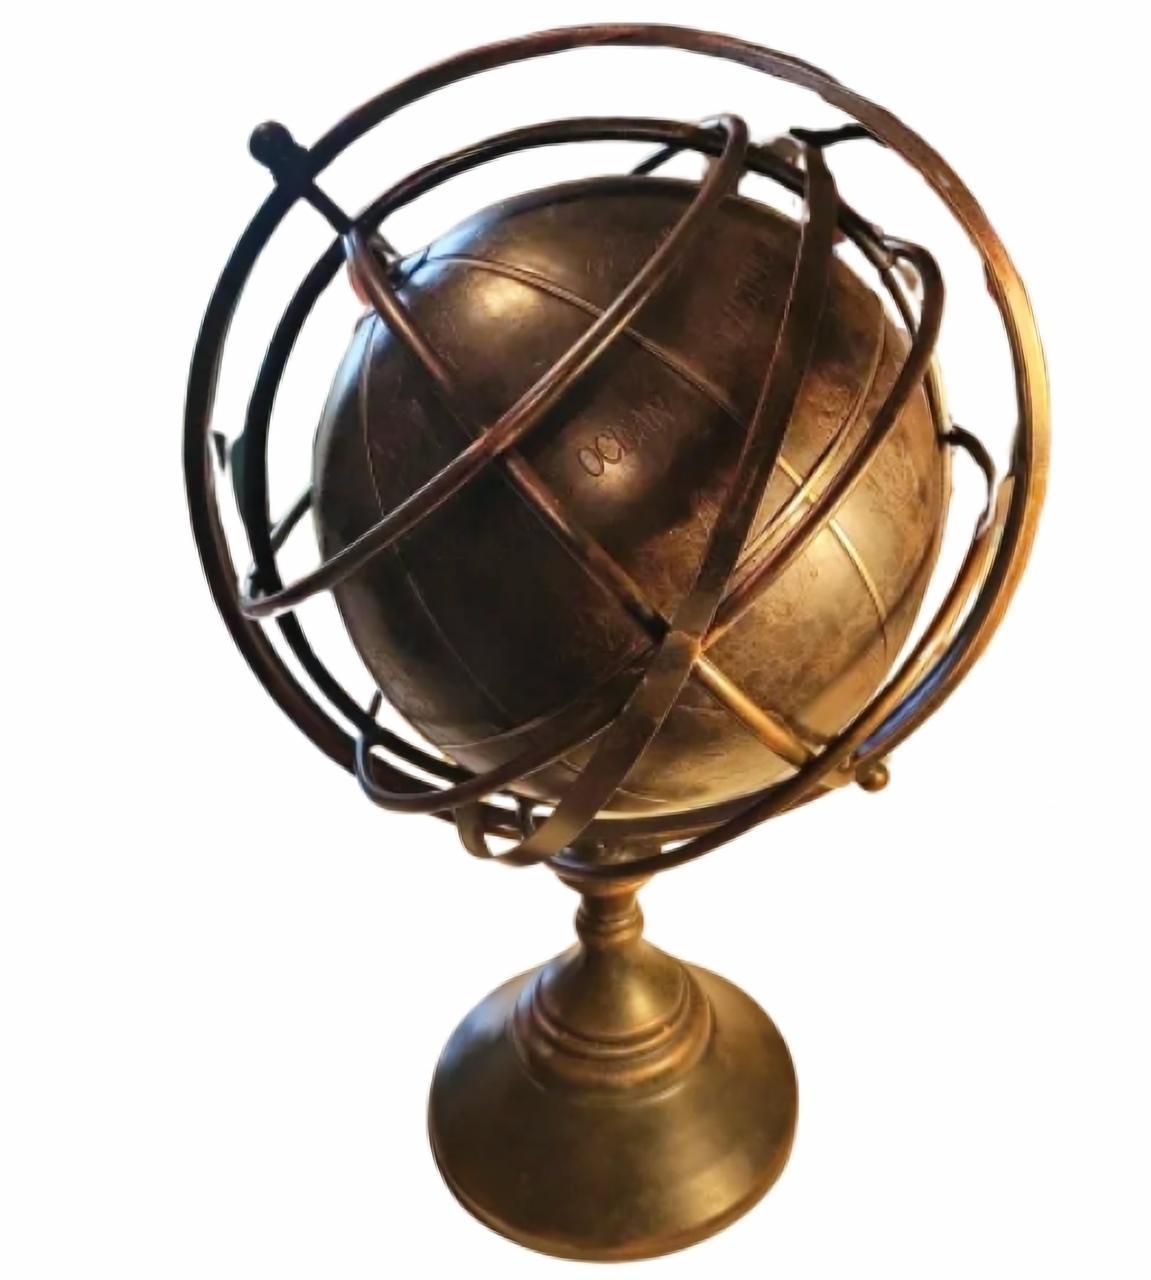 Rare English Nautical Globe with Armillary Sphere (1930) 20th Century For Sale 4